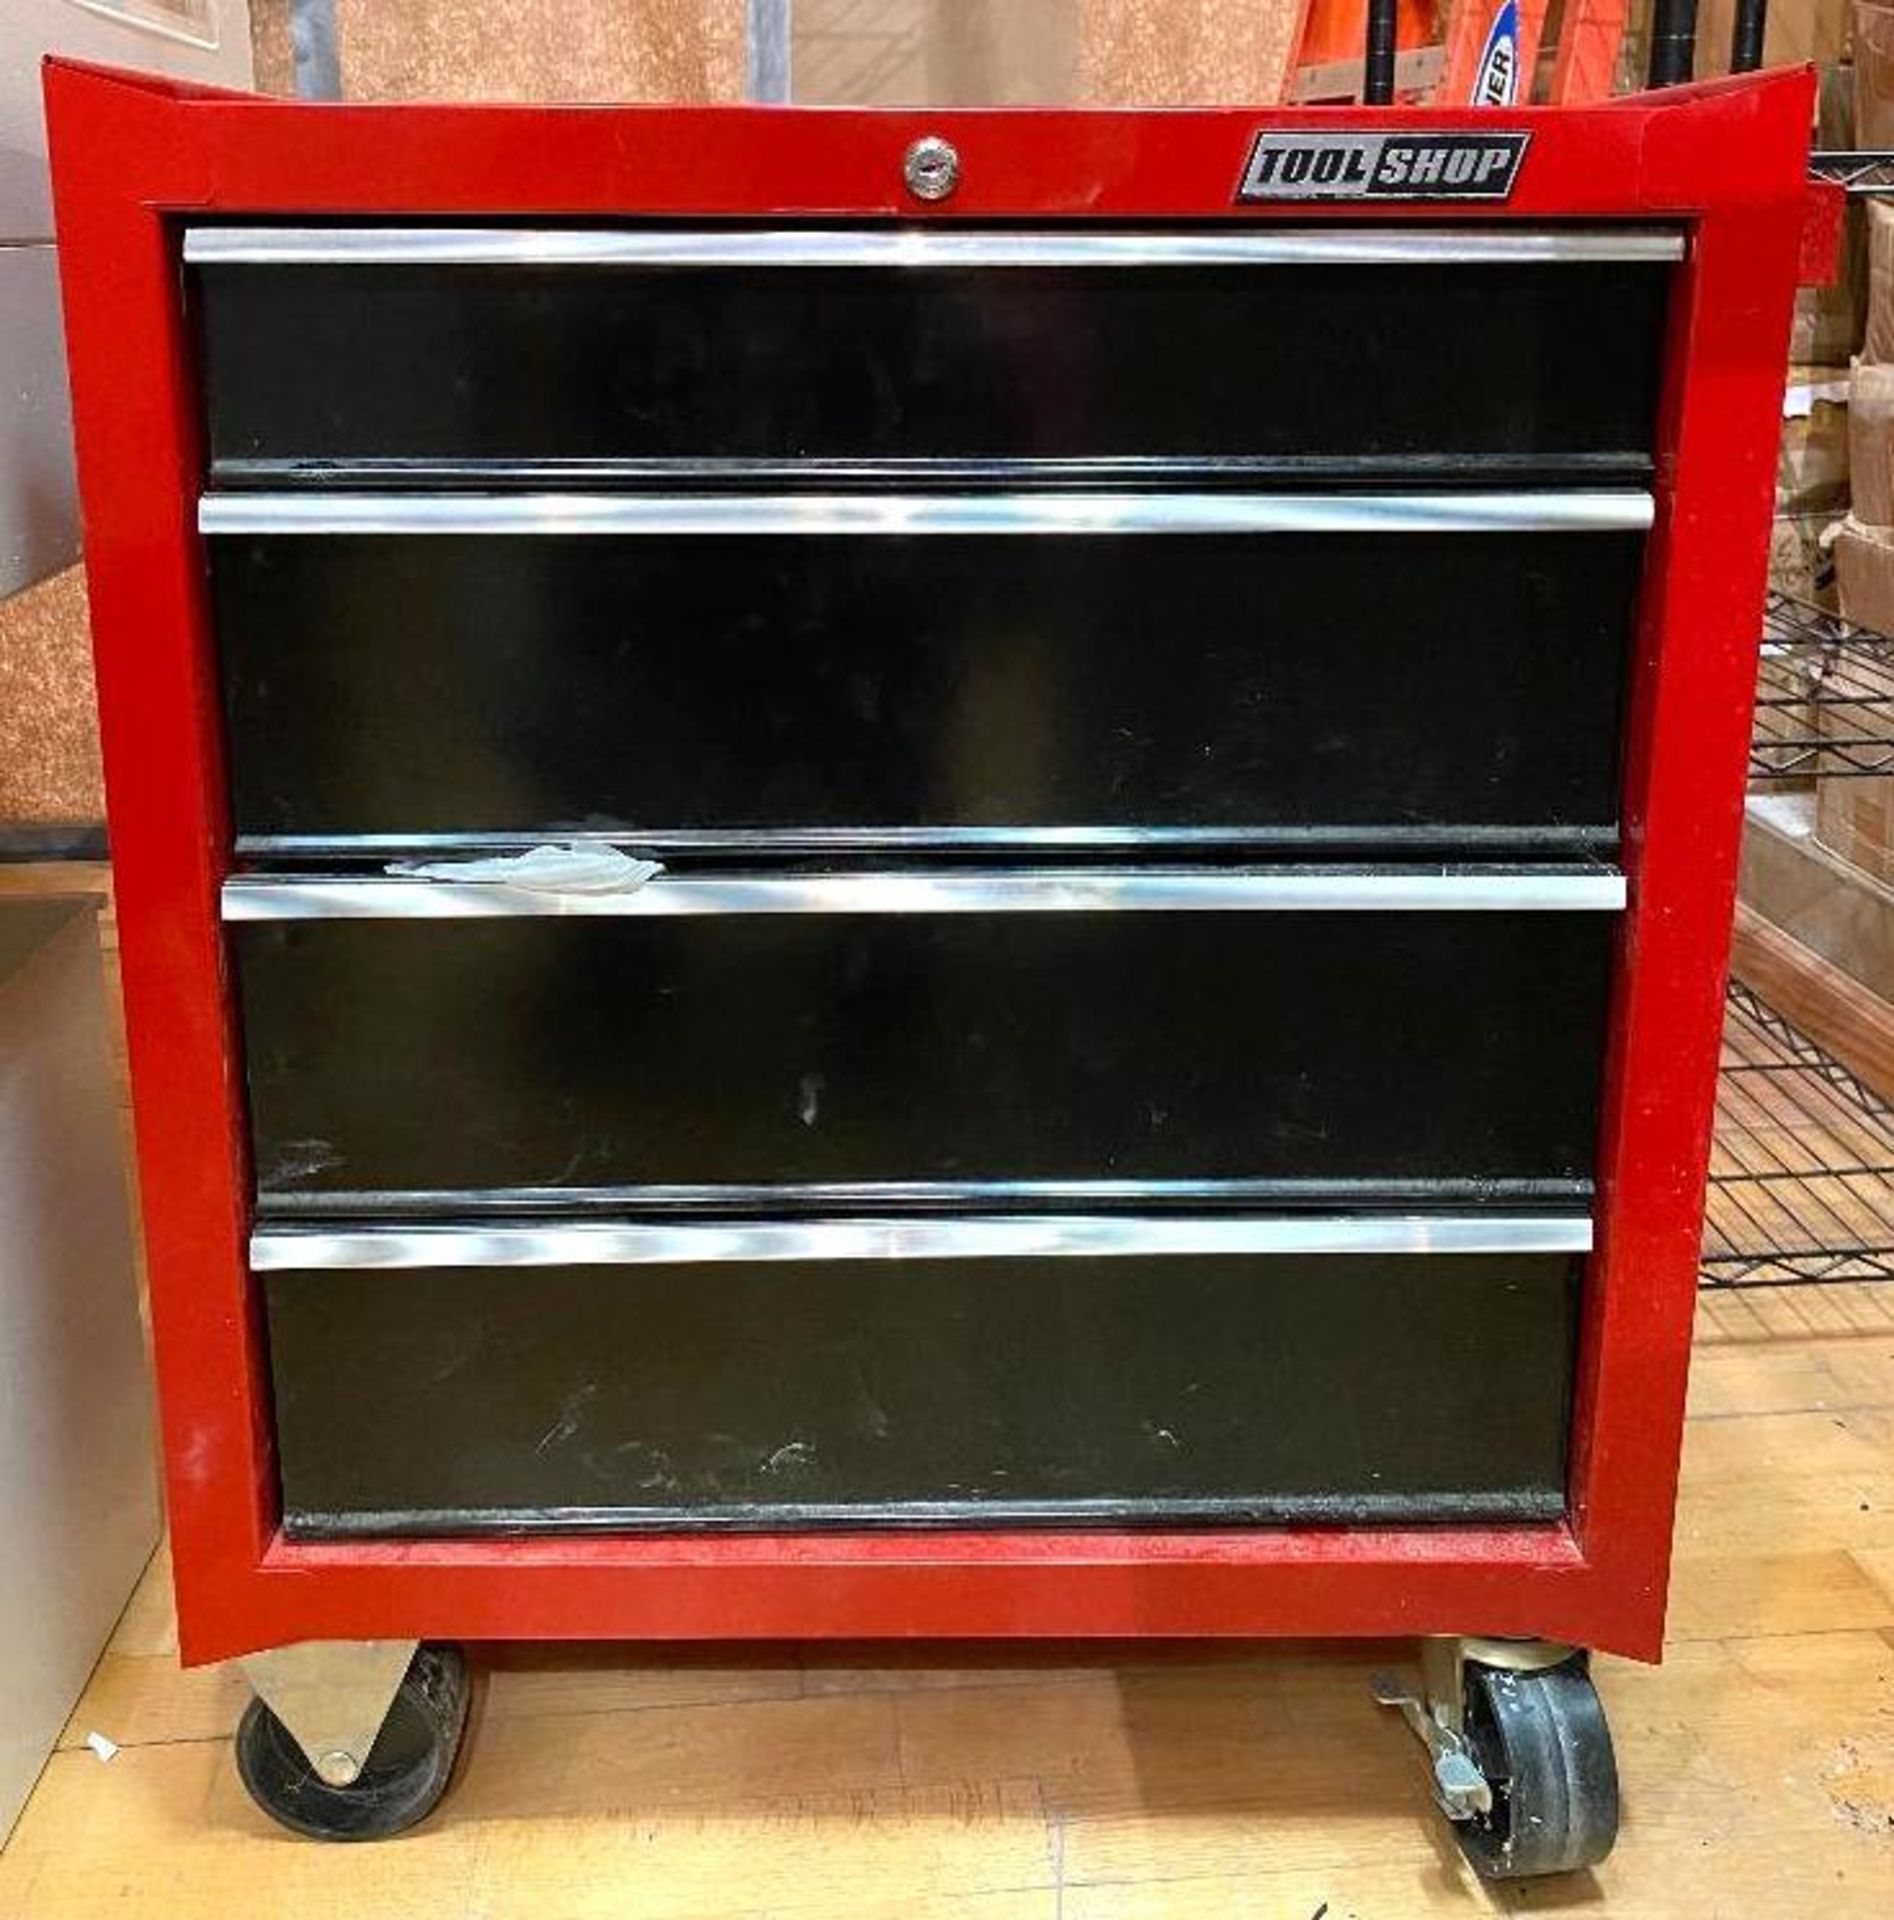 DESCRIPTION 4-DRAWER TOOL CHEST ON CASTERS (CONTENTS INCLUDED, SEE PHOTOS) BRAND/MODEL TOOL SHOP SIZ